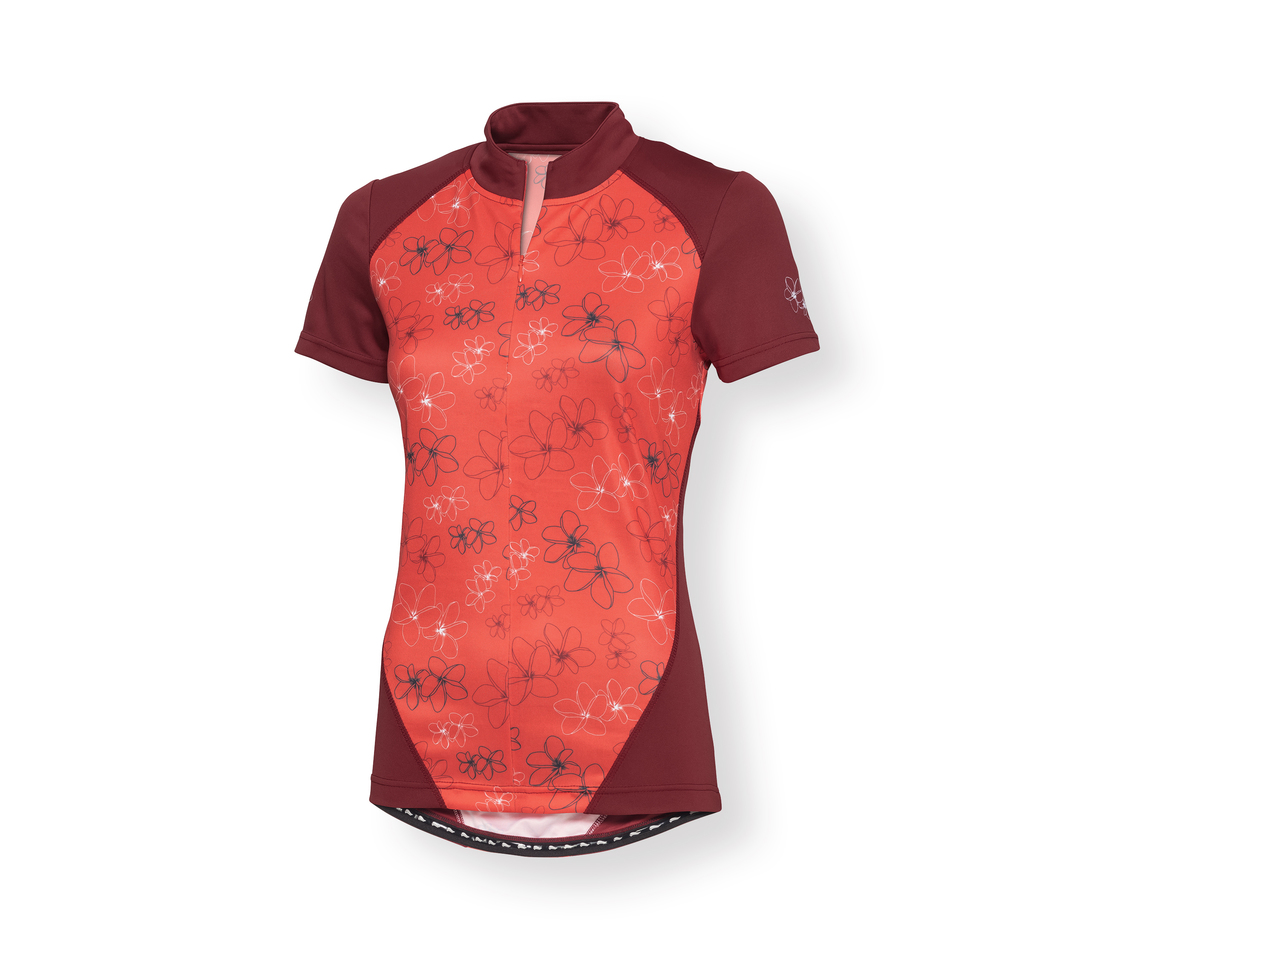 'Crivit(R)' Maillot ciclismo mujer